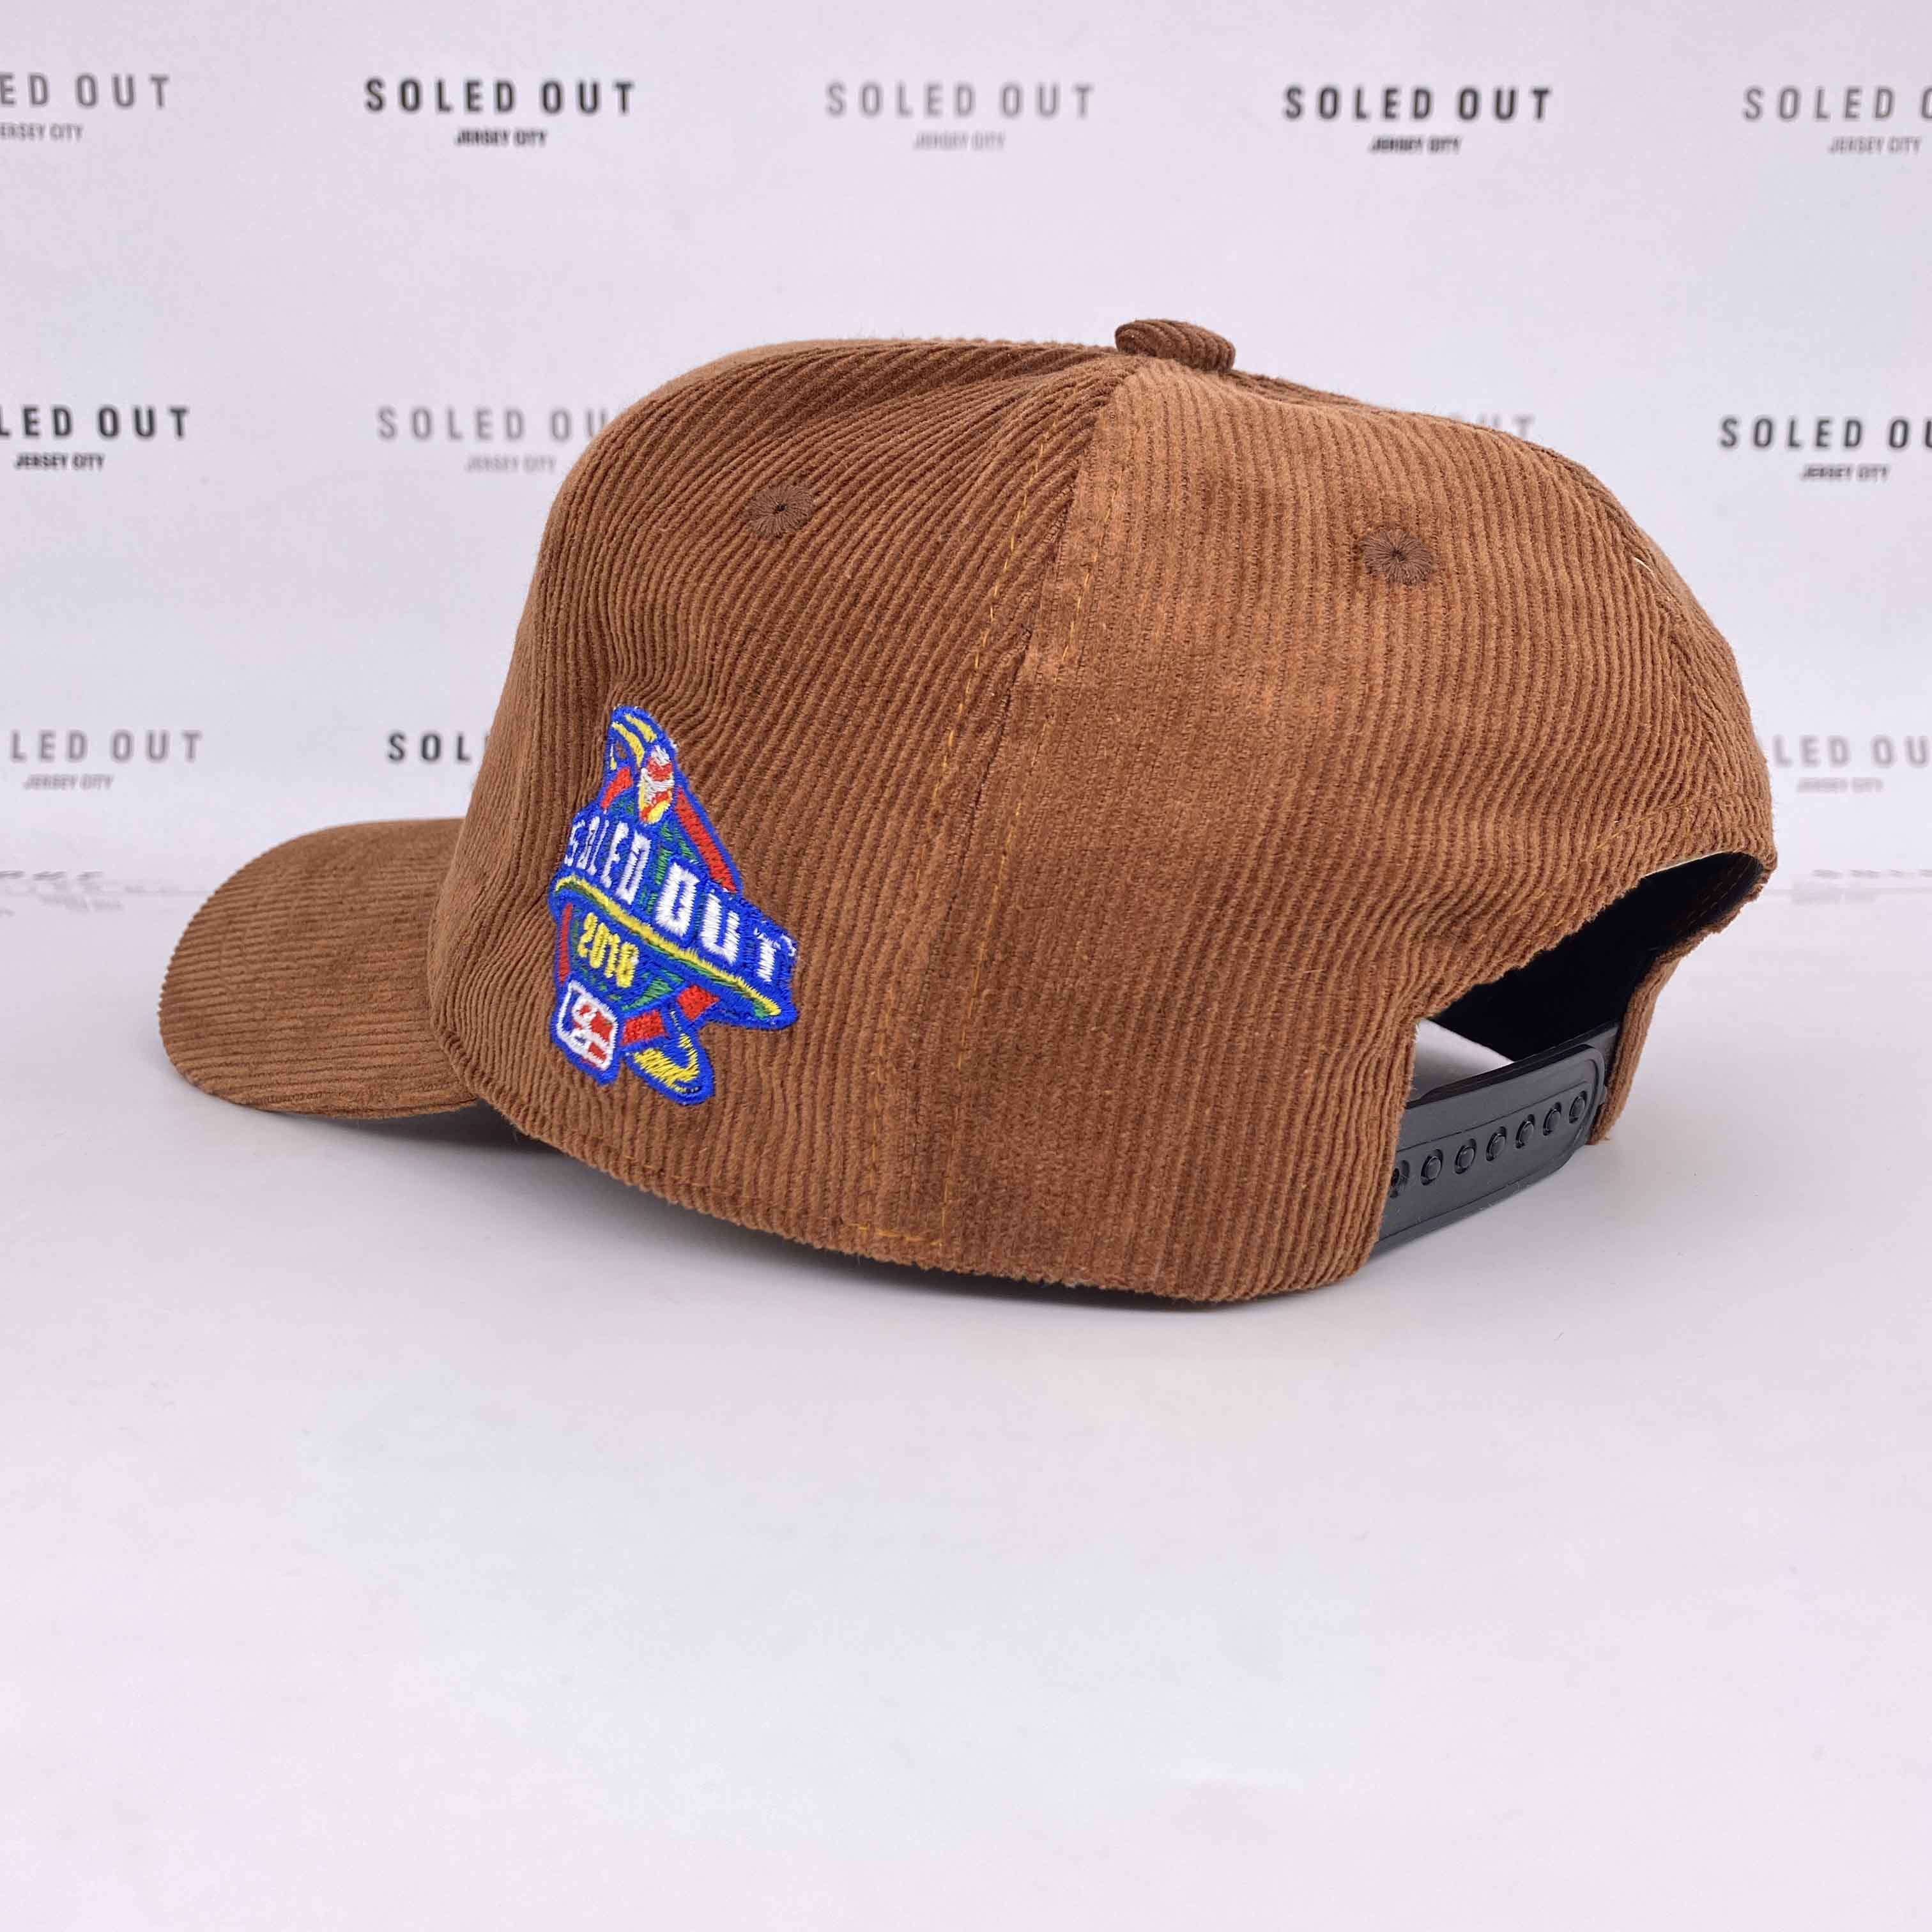 Soled Out Snapback "CORDUROY COCOA" 2022 New Size OS